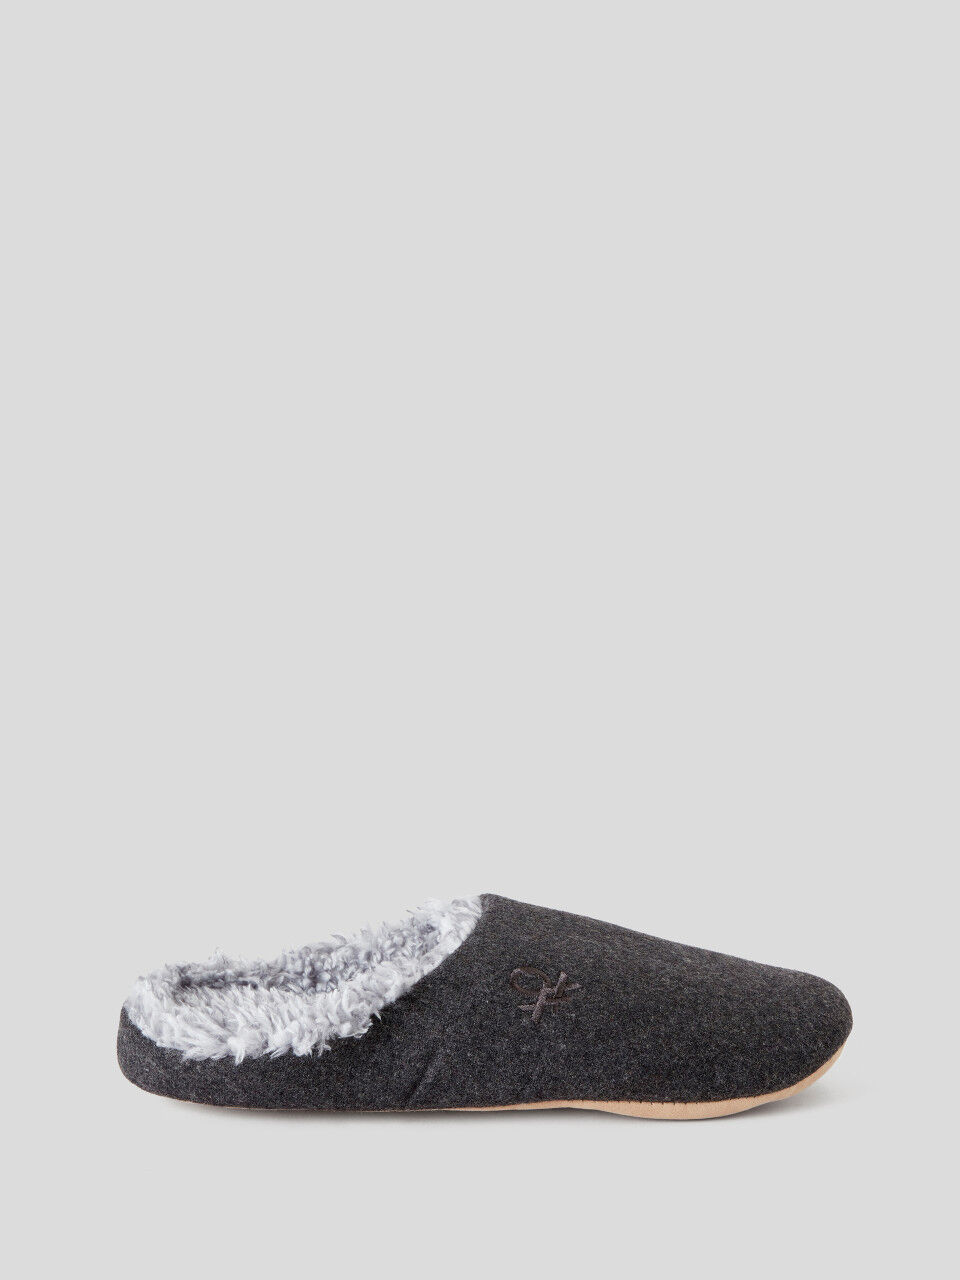 Gray lined slippers